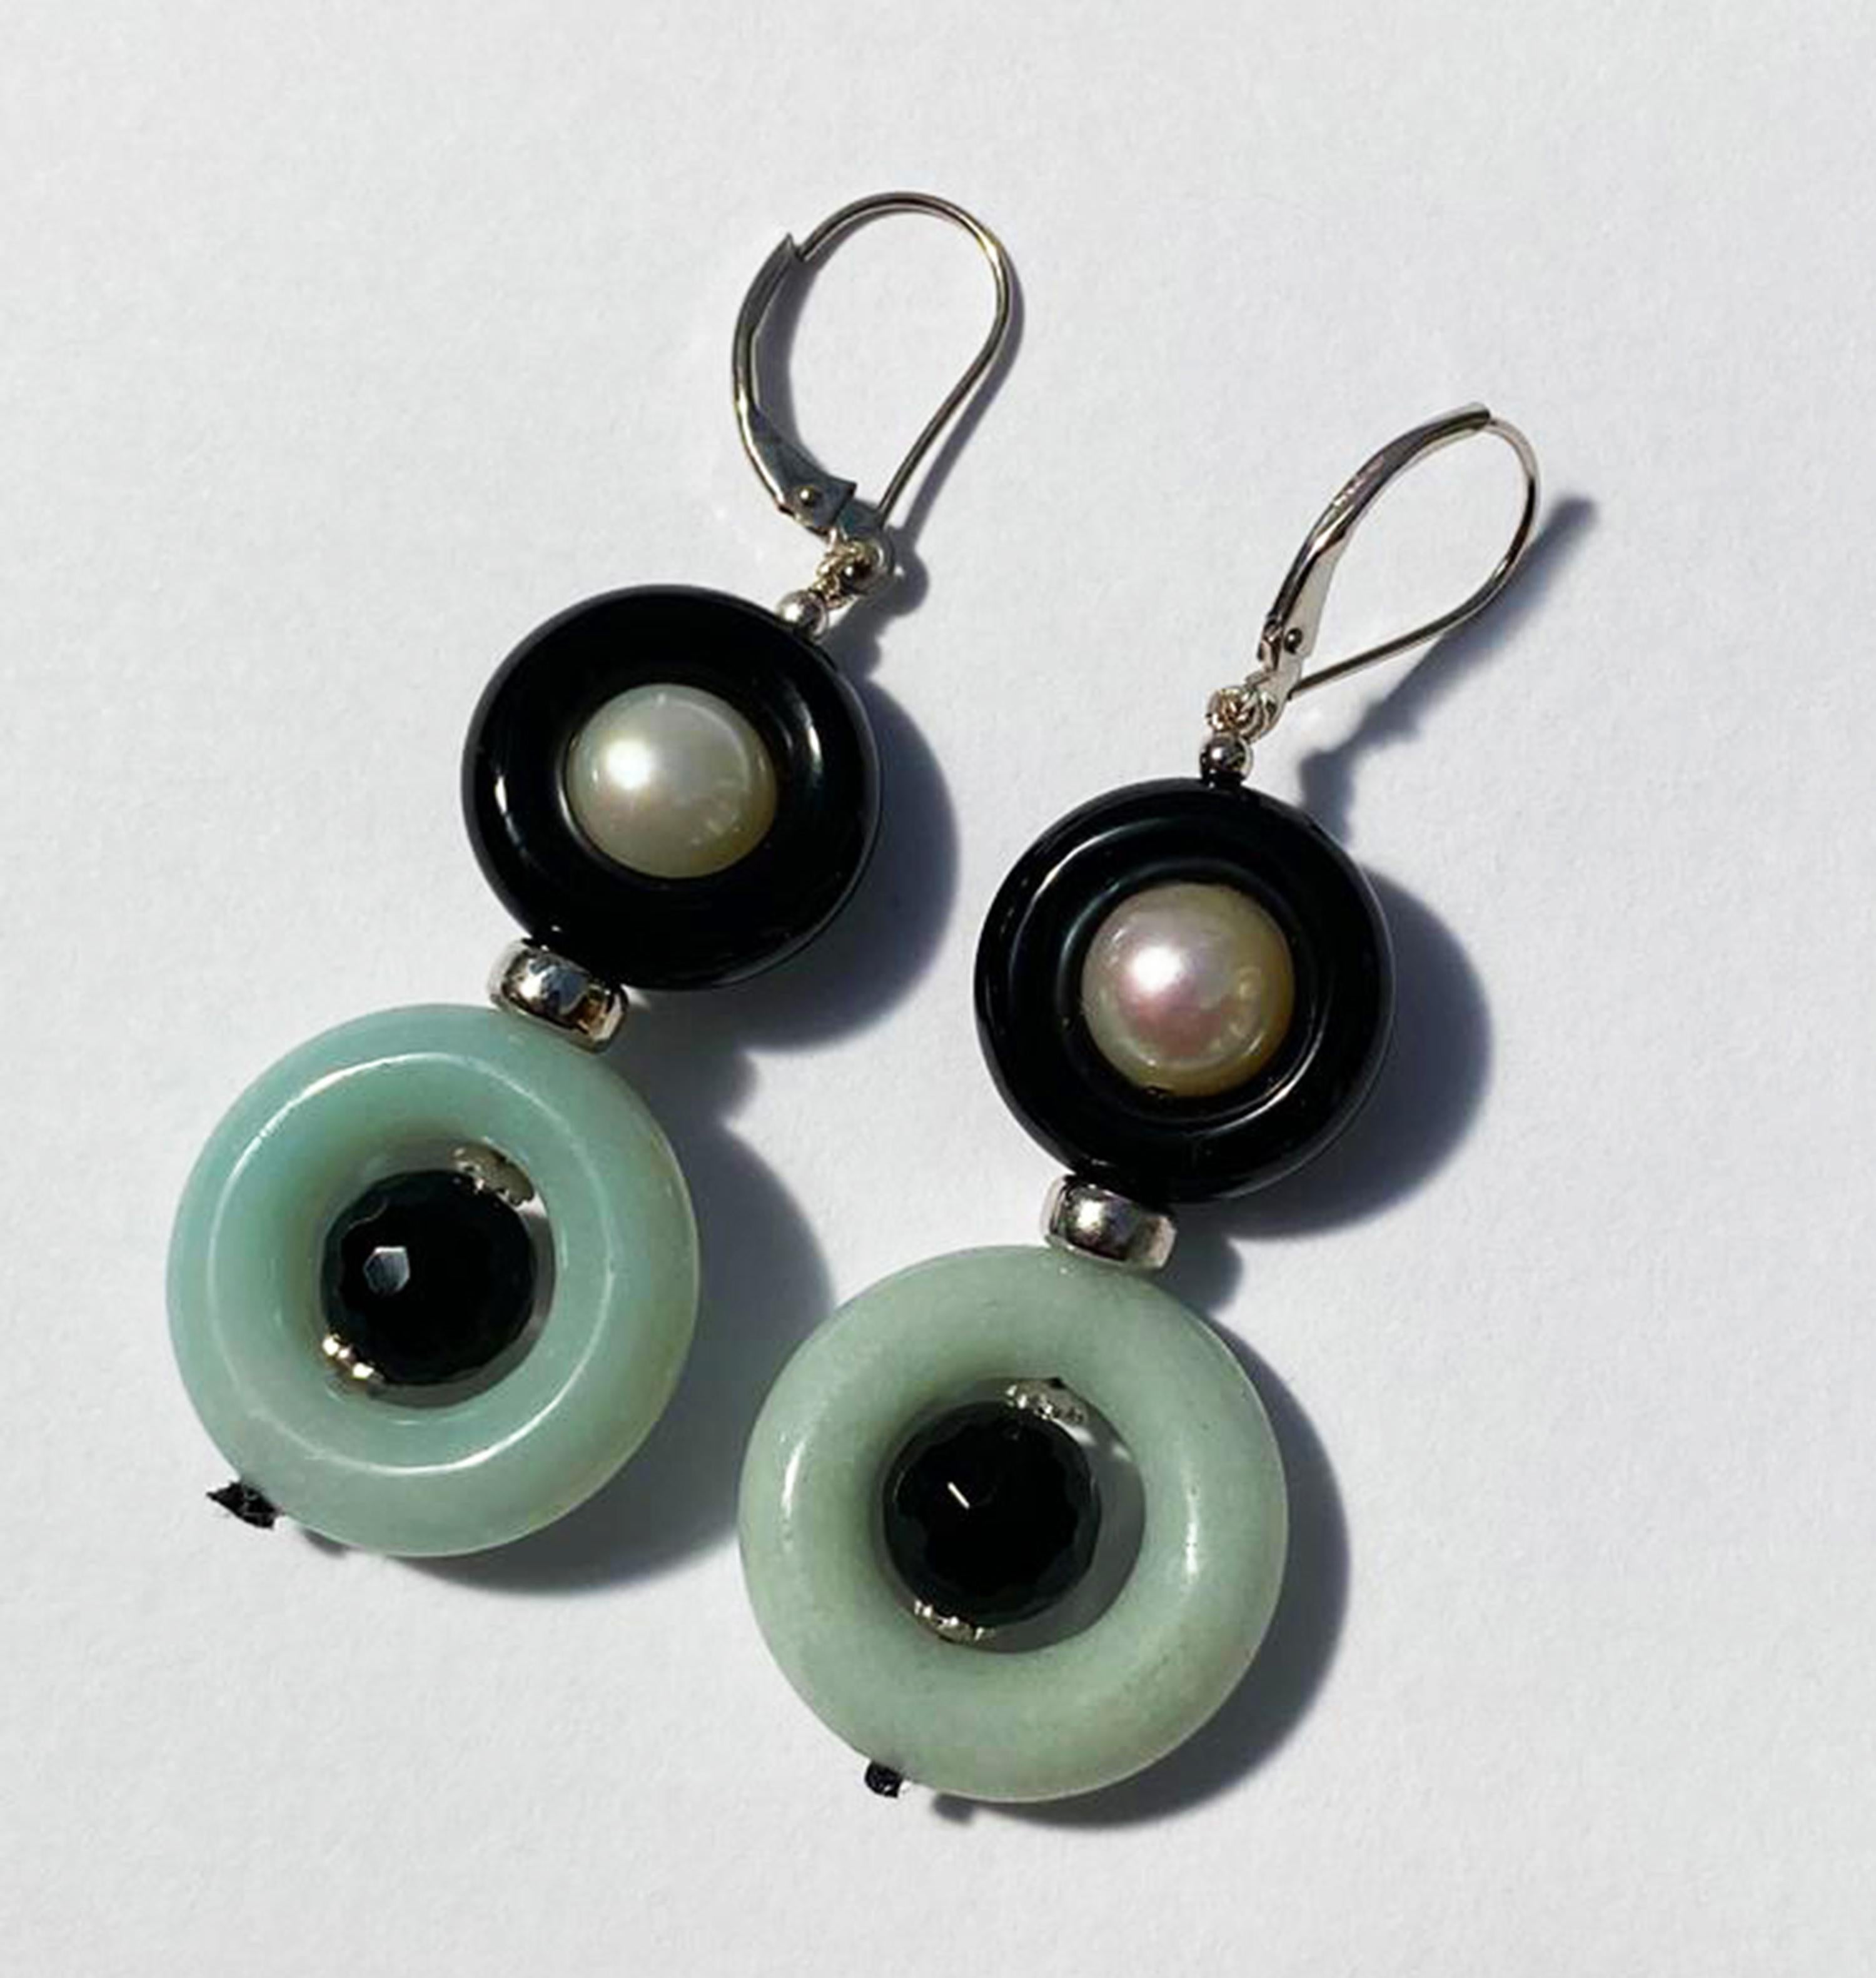 These elegant and sophisticated black onyx bead ring with pearls and jade beads earrings are a must-have. They are handcrafted with 14k white gold findings, beads, and lever-back making the piece beautiful and bold. The onyx bead rings contrast with